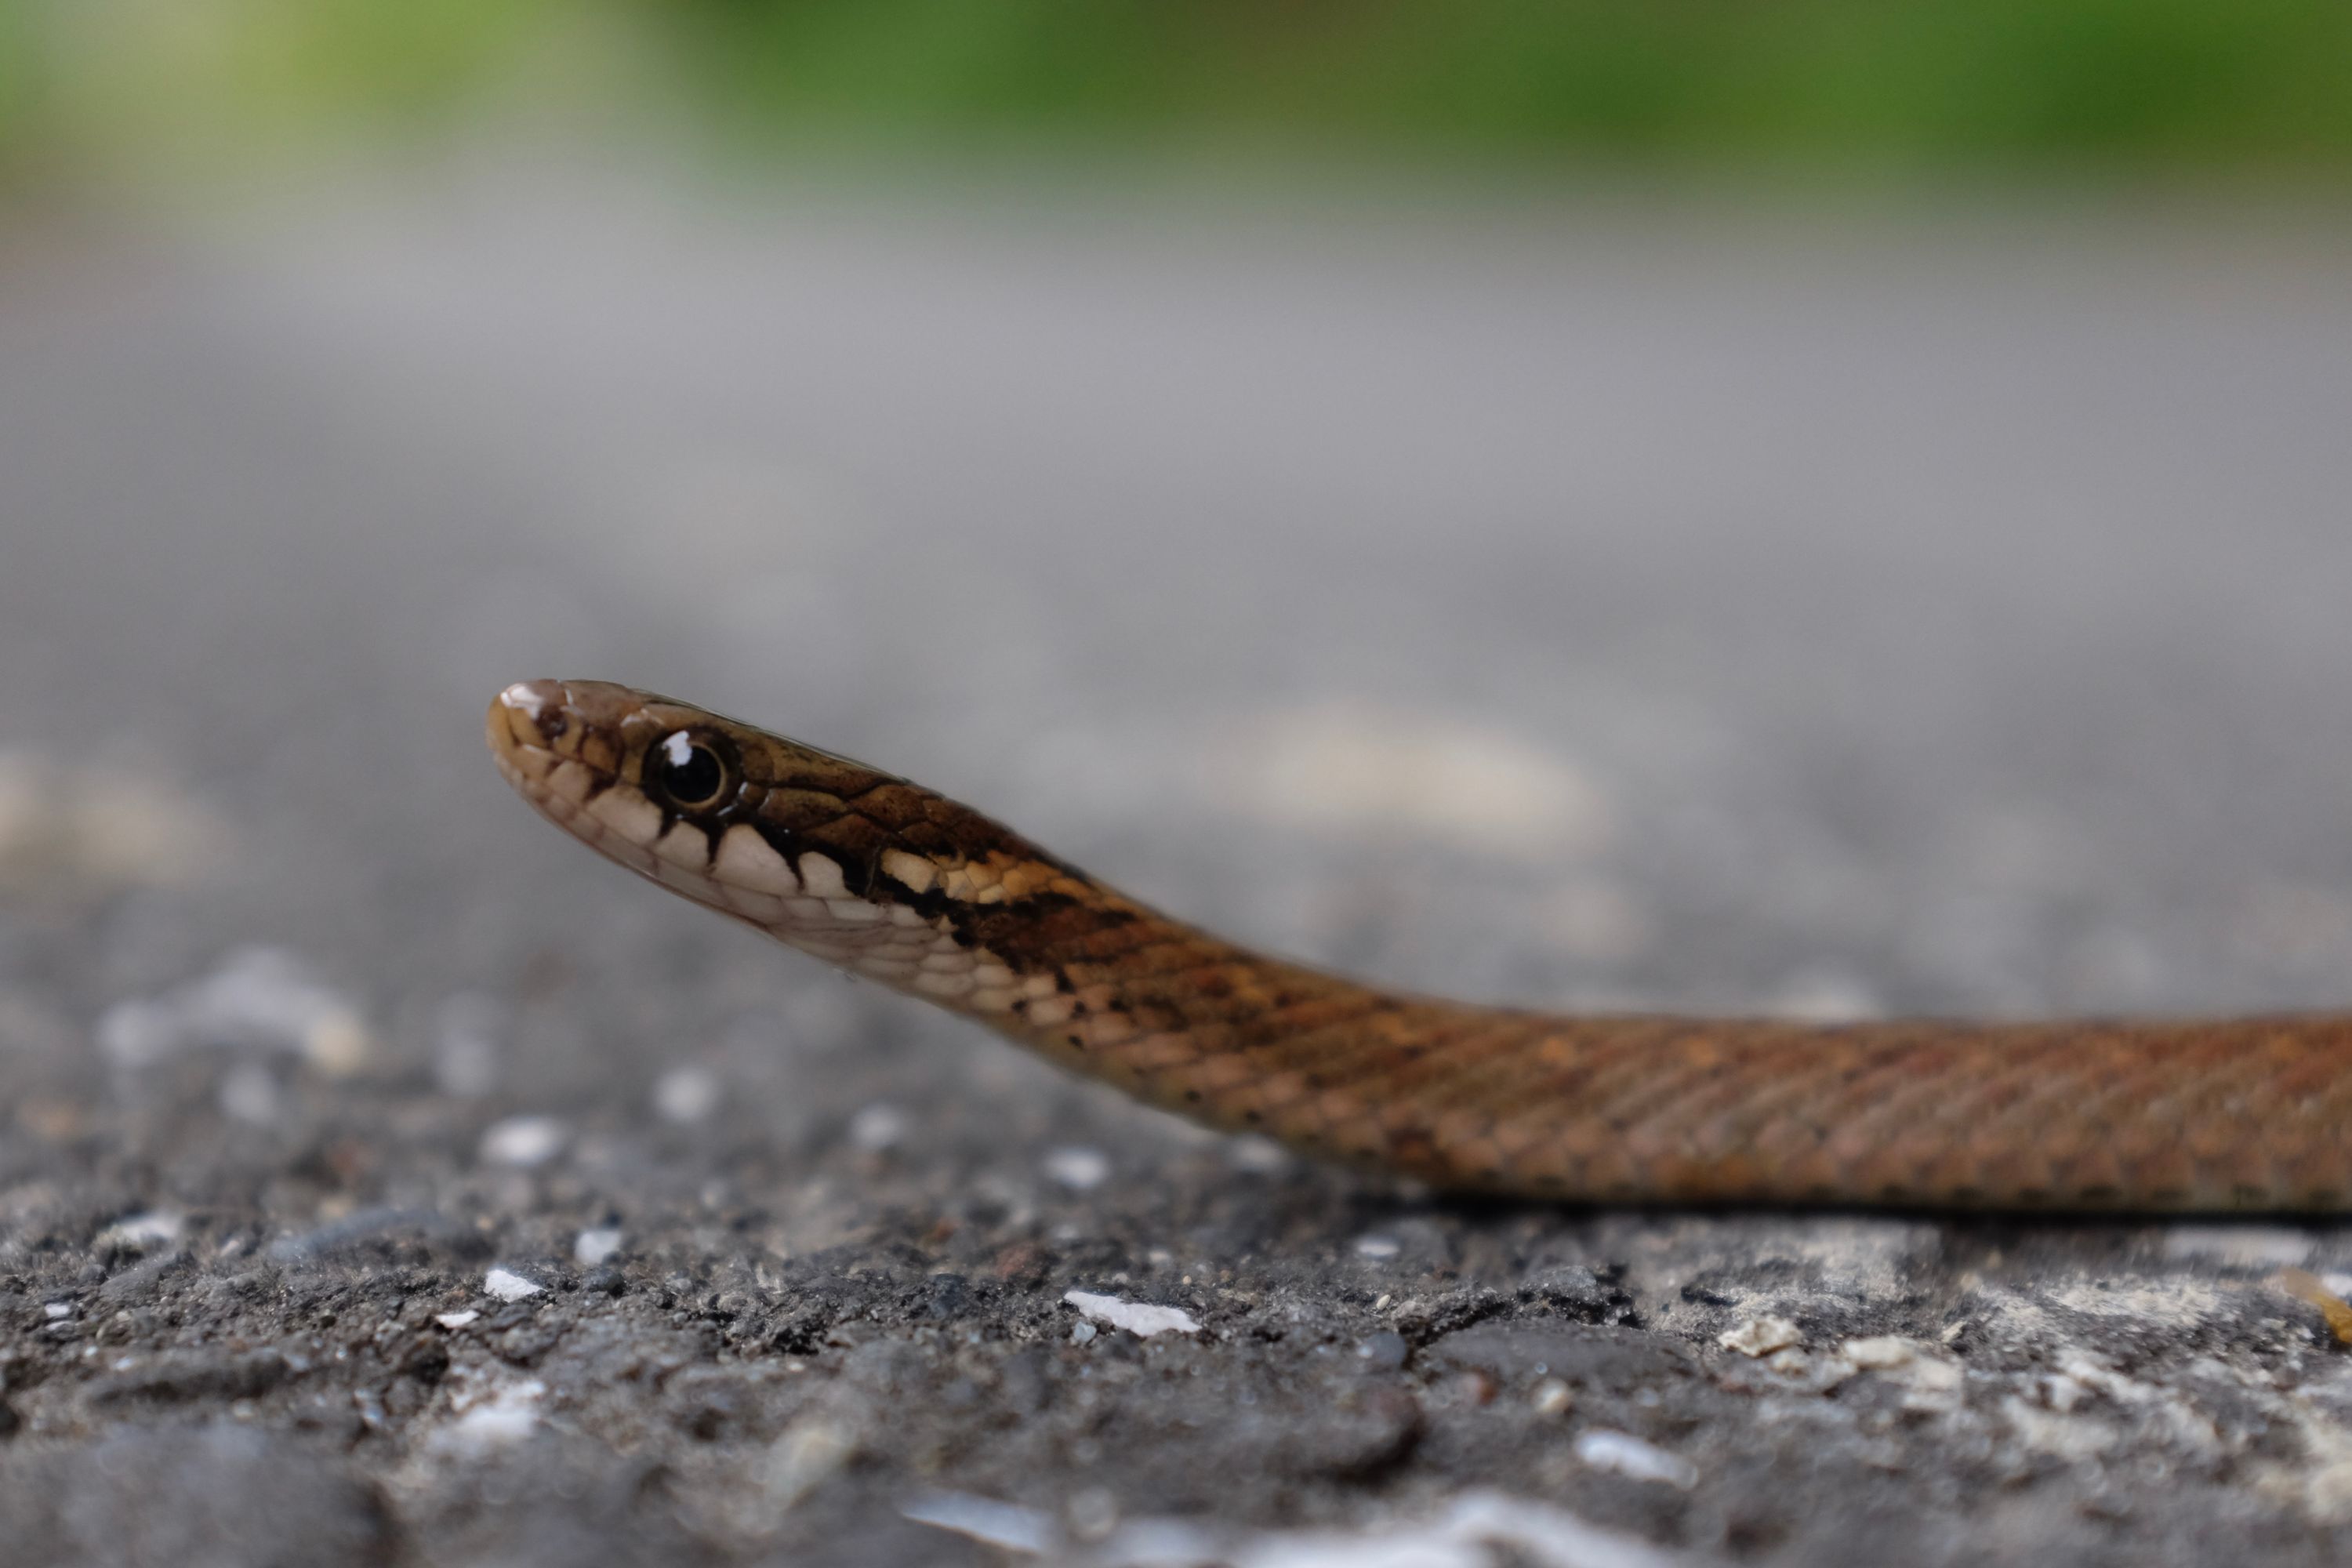 A closeup view of a juvenile Japanese striped snake looking straight into the camera.